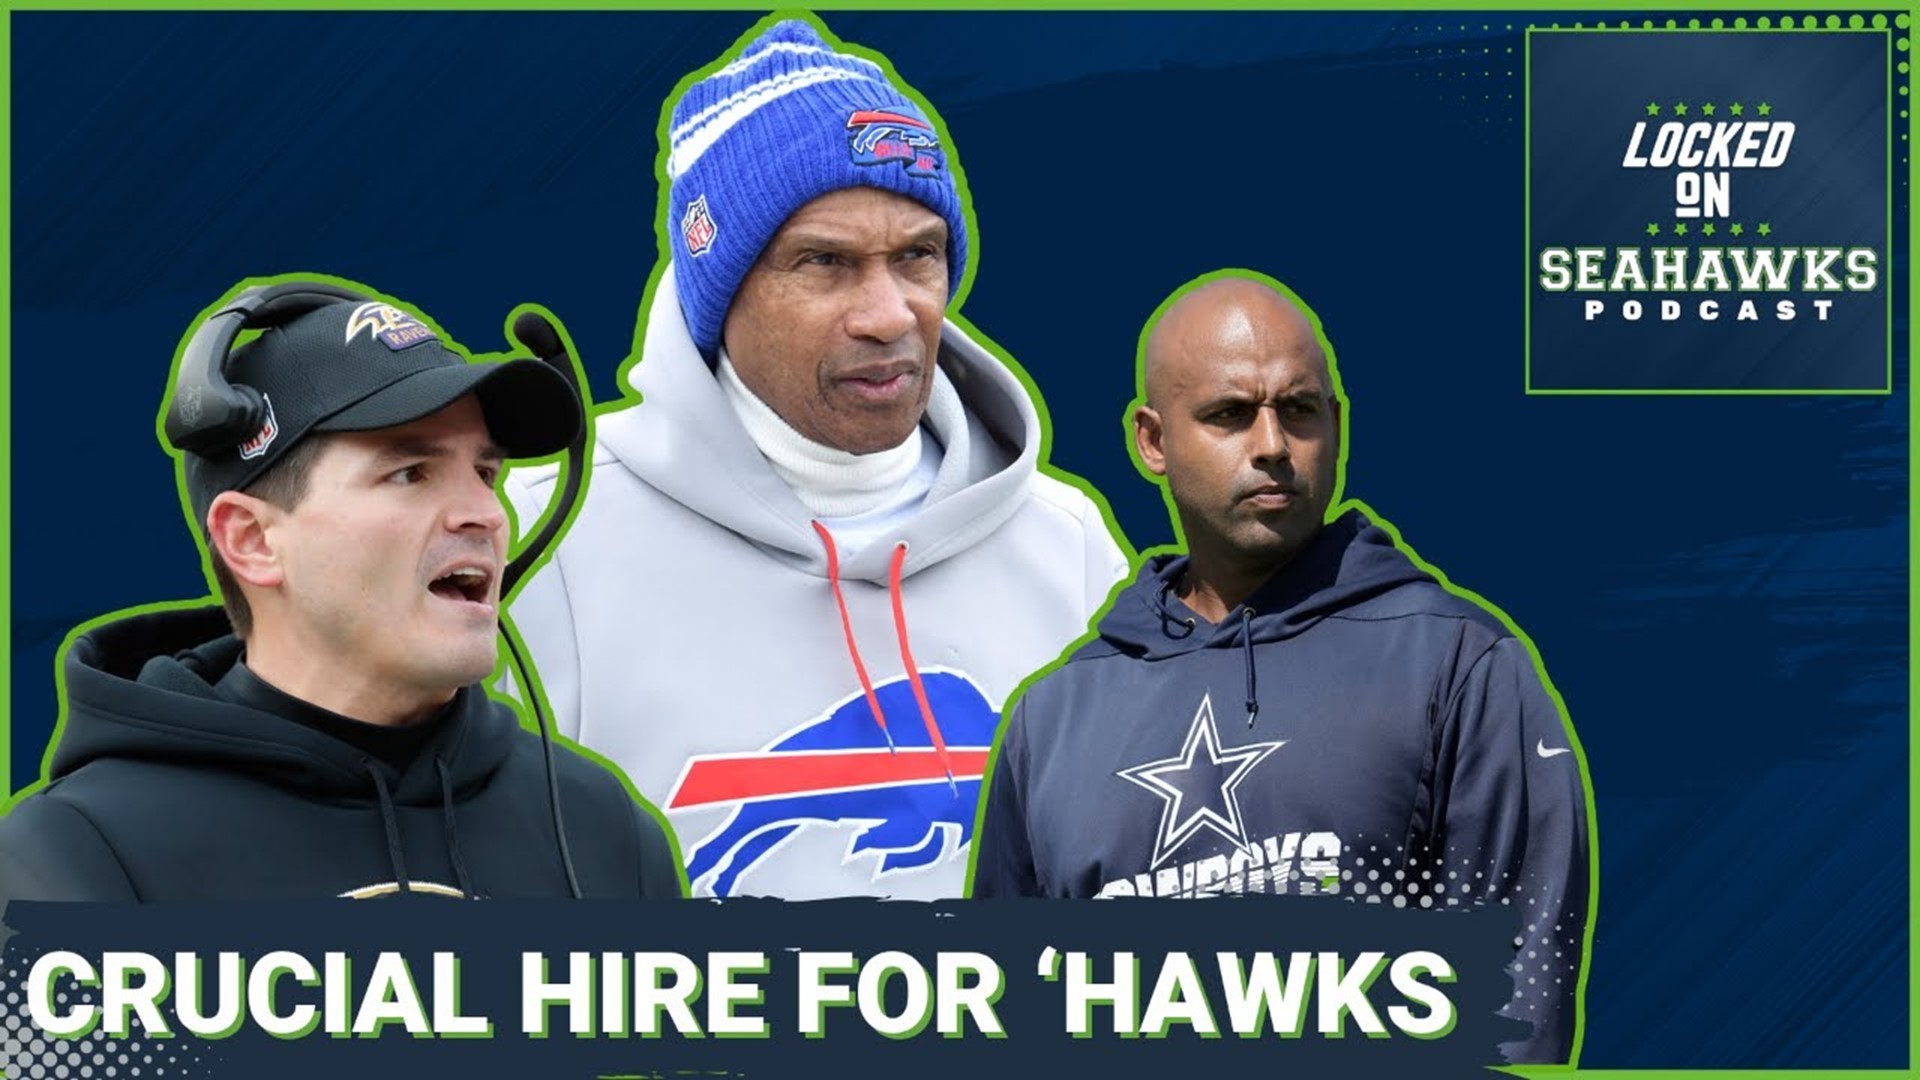 Seemingly prioritizing everything over time served in the search process, the Seattle Seahawks have zero seasons of combined experience with their head coach